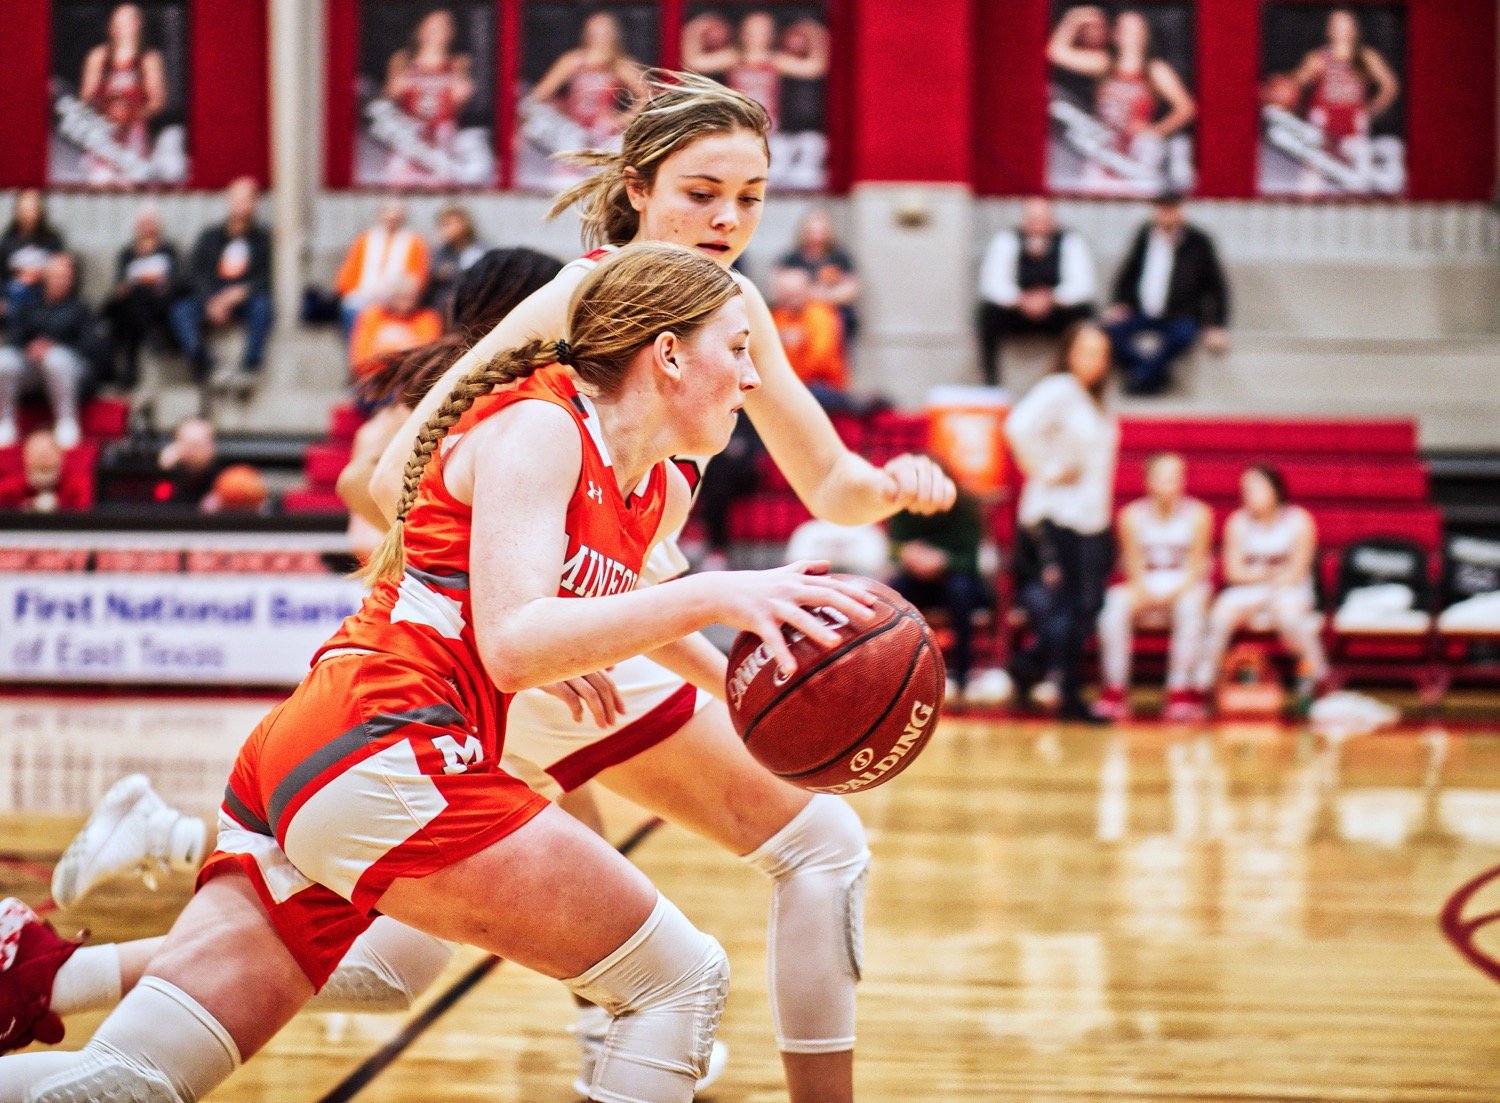 Macy Fischer makes her way up-court, undeterred by the Harmony defender. [more hoops highlights here]